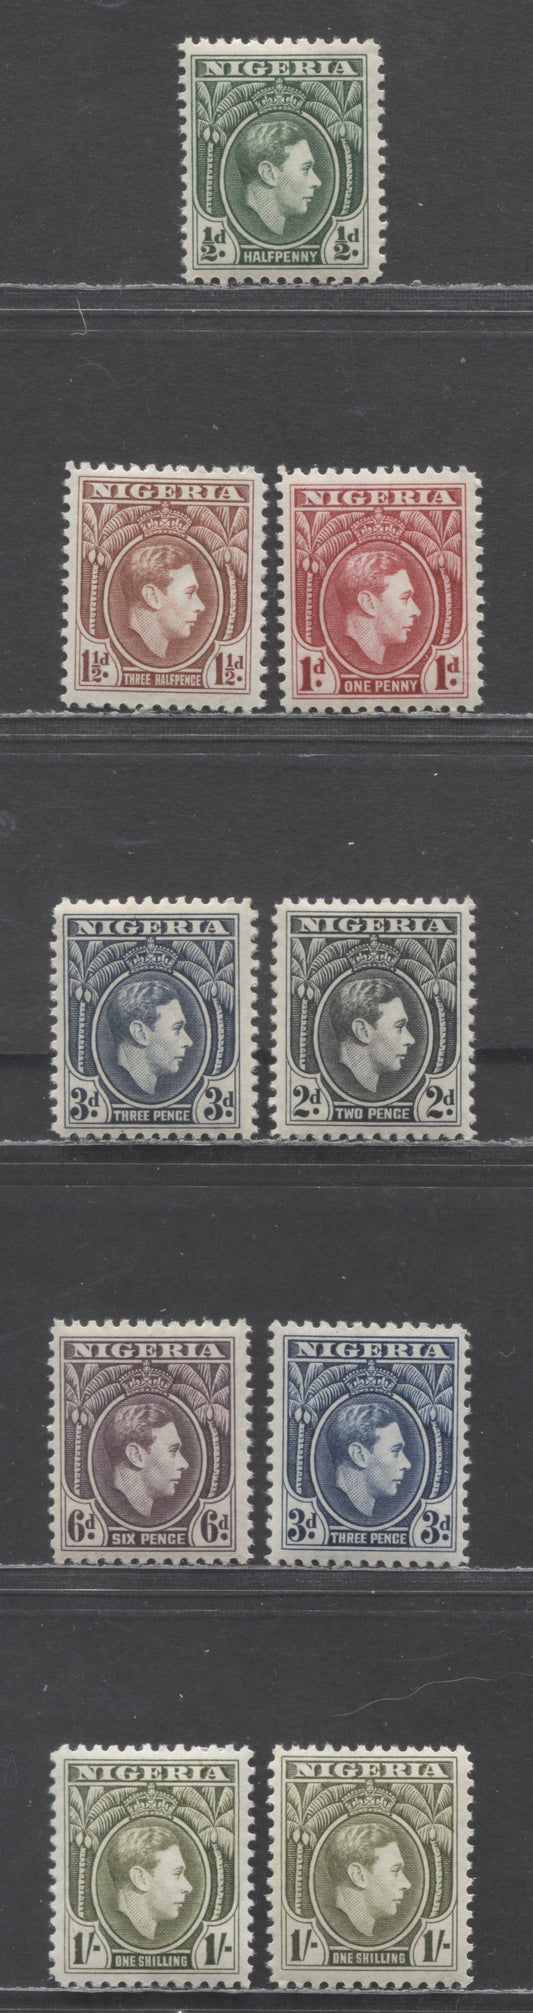 Nigeria SC#53/61 1938-1939 King George VI Palm Tree Definitives, 1938 & 1939 Printings, 9 F/VFNH/OG Singles, Click on Listing to See ALL Pictures, Estimated Value $150